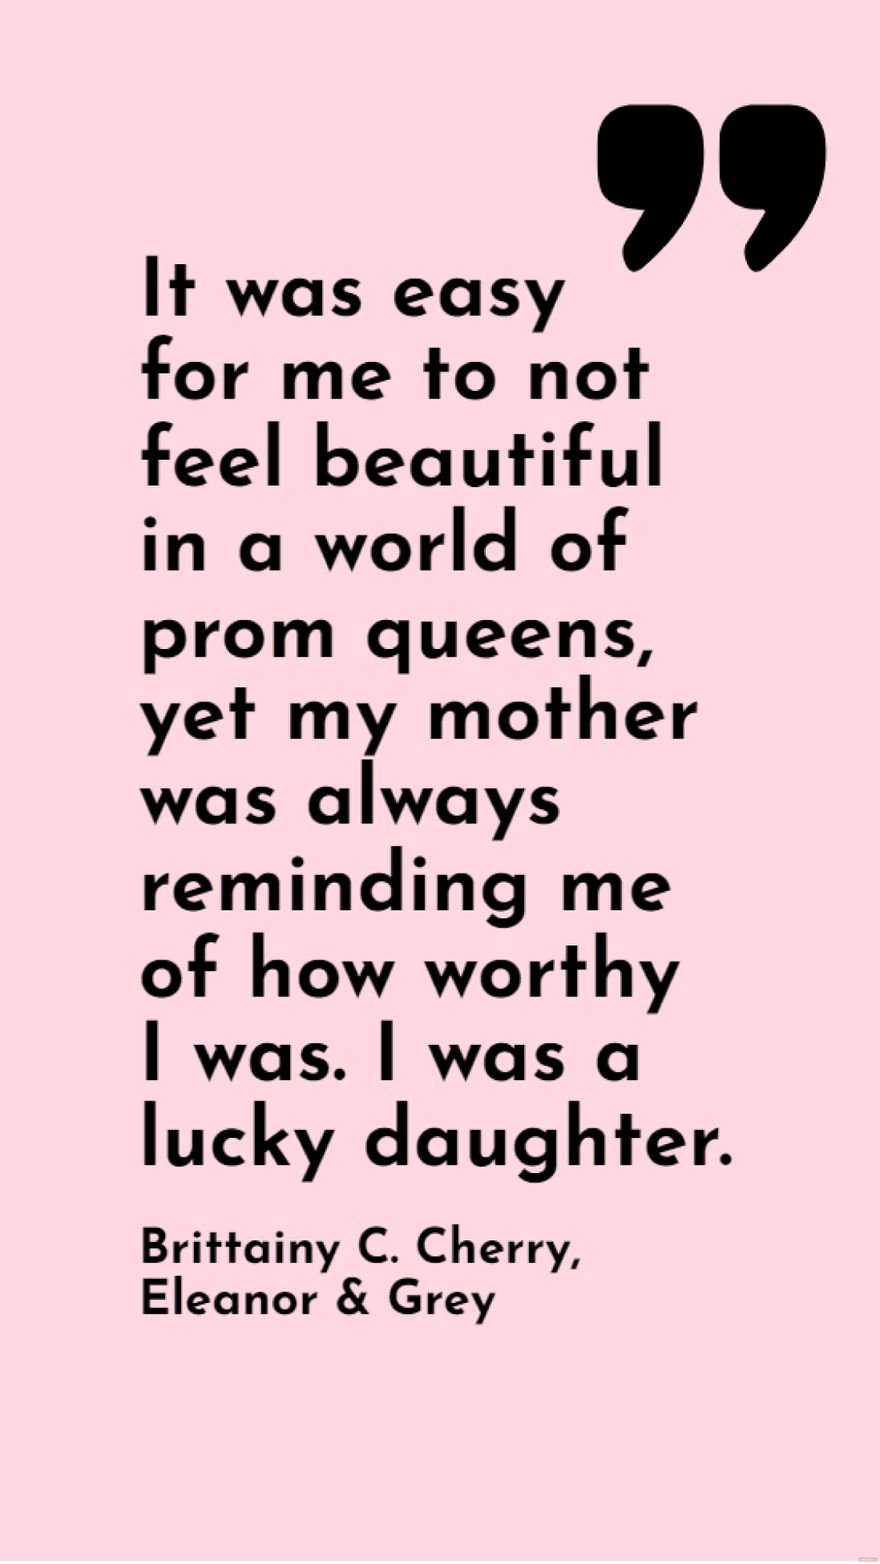 Free Brittainy C. Cherry, Eleanor & Grey - It was easy for me to not feel beautiful in a world of prom queens, yet my mother was always reminding me of how worthy I was. I was a lucky daughter.